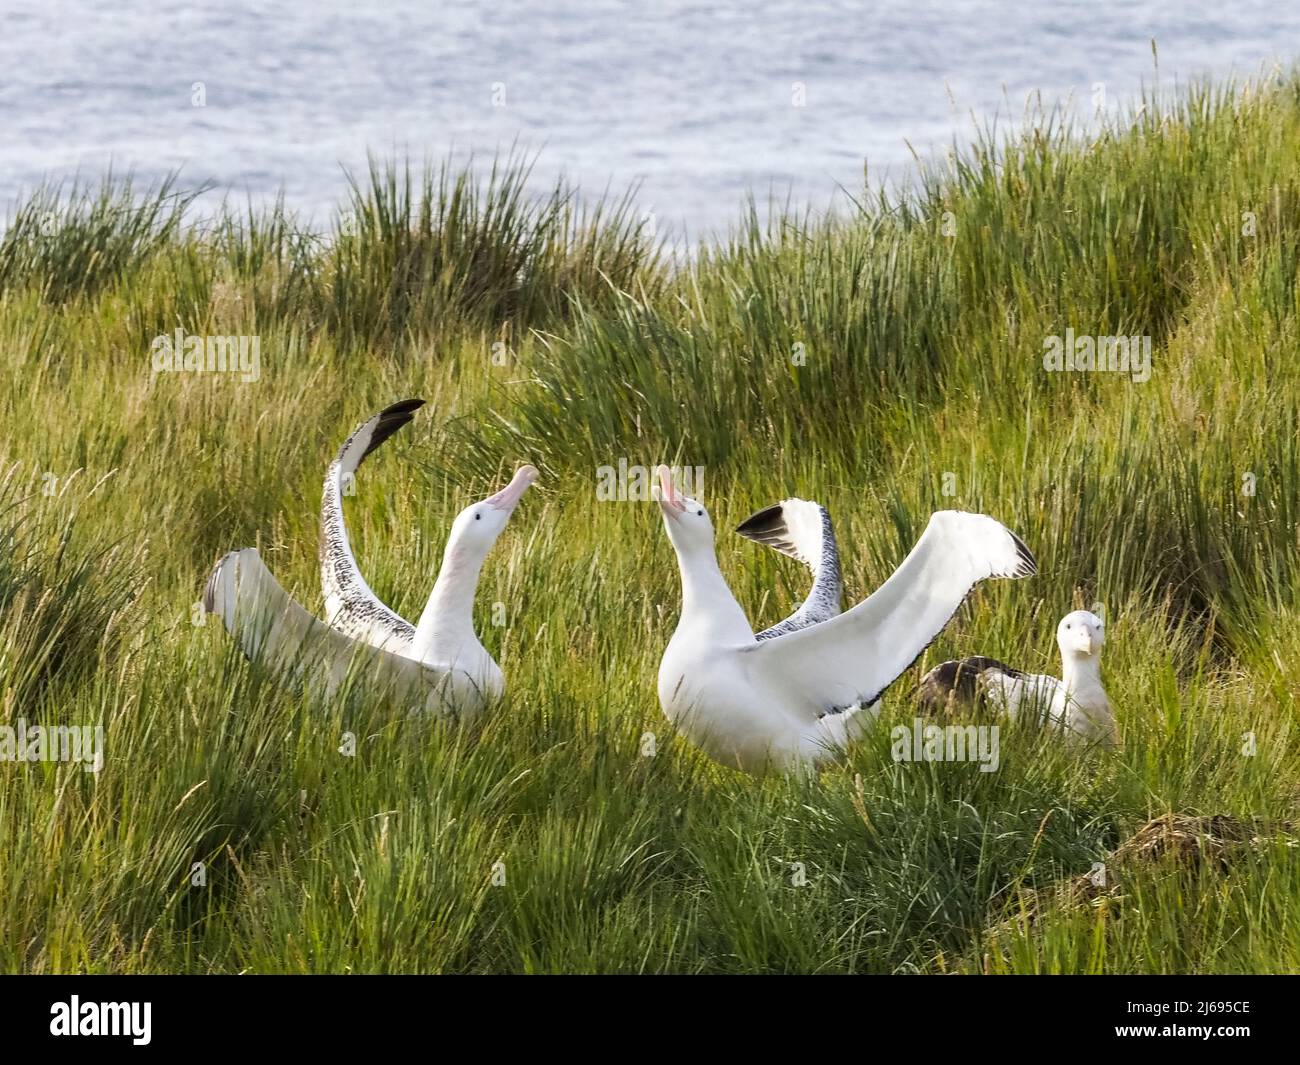 Adult wandering albatross (Diomedea exulans), courtship display on Prion Island, Bay of Isles, South Georgia, South Atlantic, Polar Regions Stock Photo